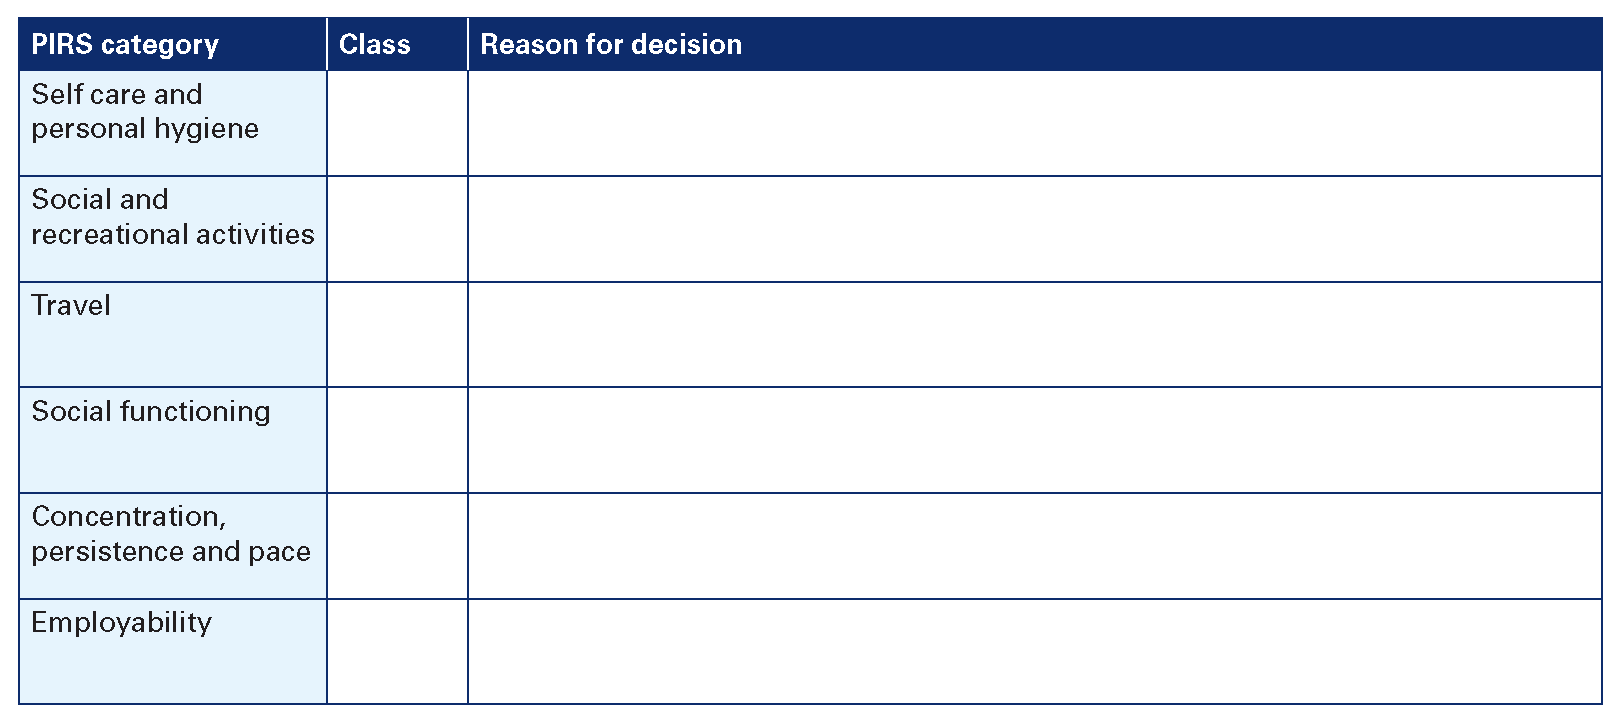 Part C of the PIRS rating form - PIRS class and reason for decision